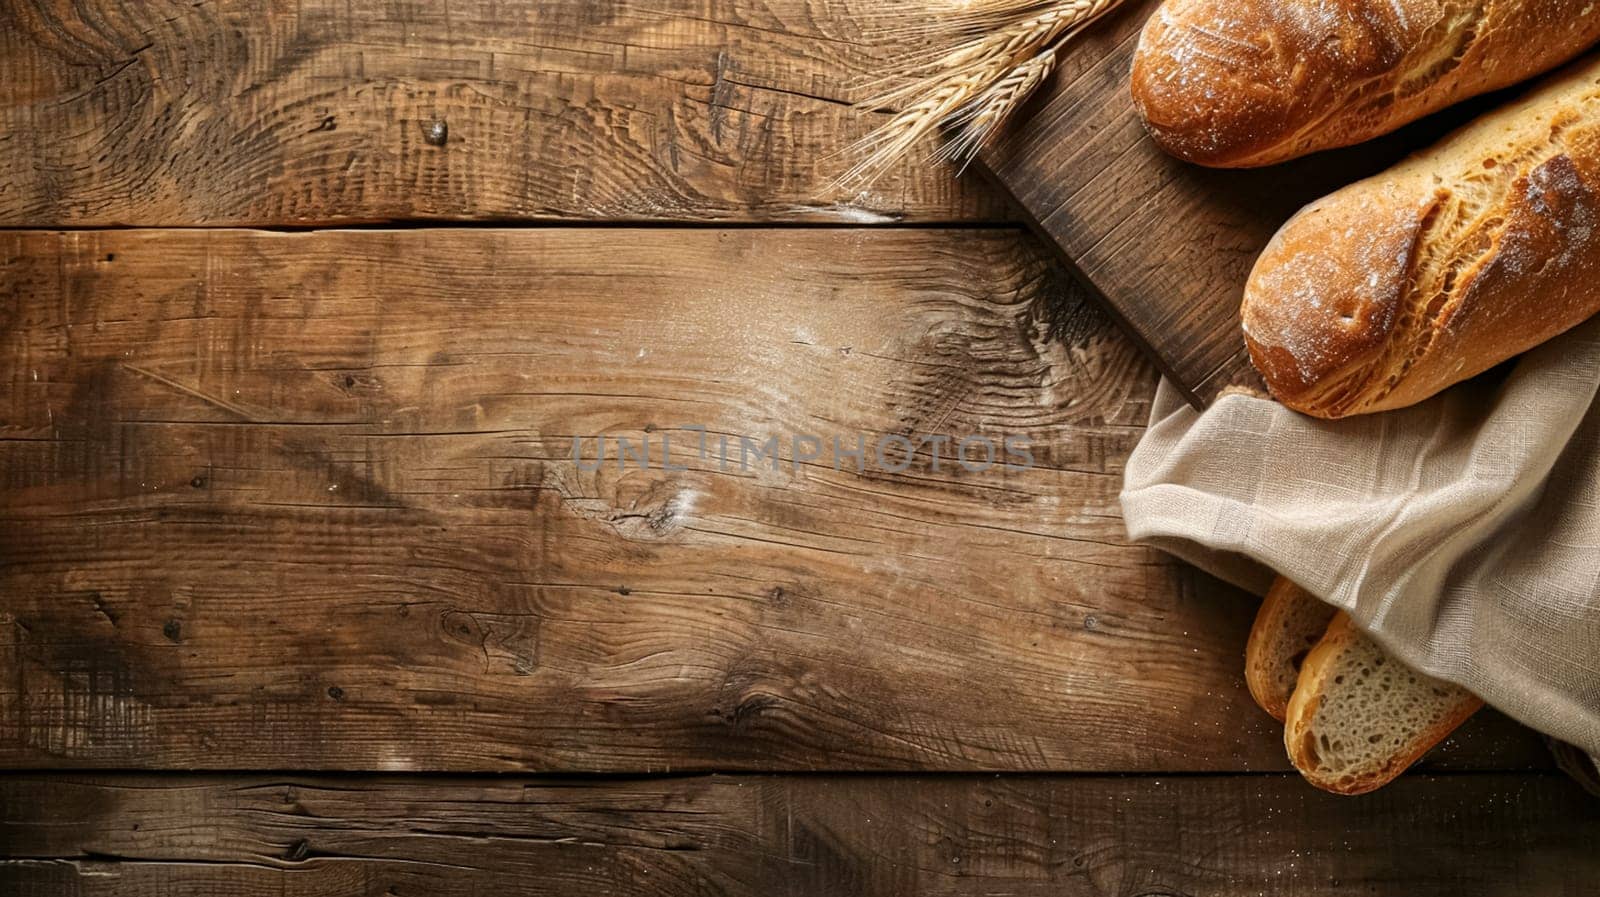 Bakery with baked bread, variety of bread loaves, rolls, and baguettes displayed in baskets and on wooden shelves in the English countryside village by Anneleven